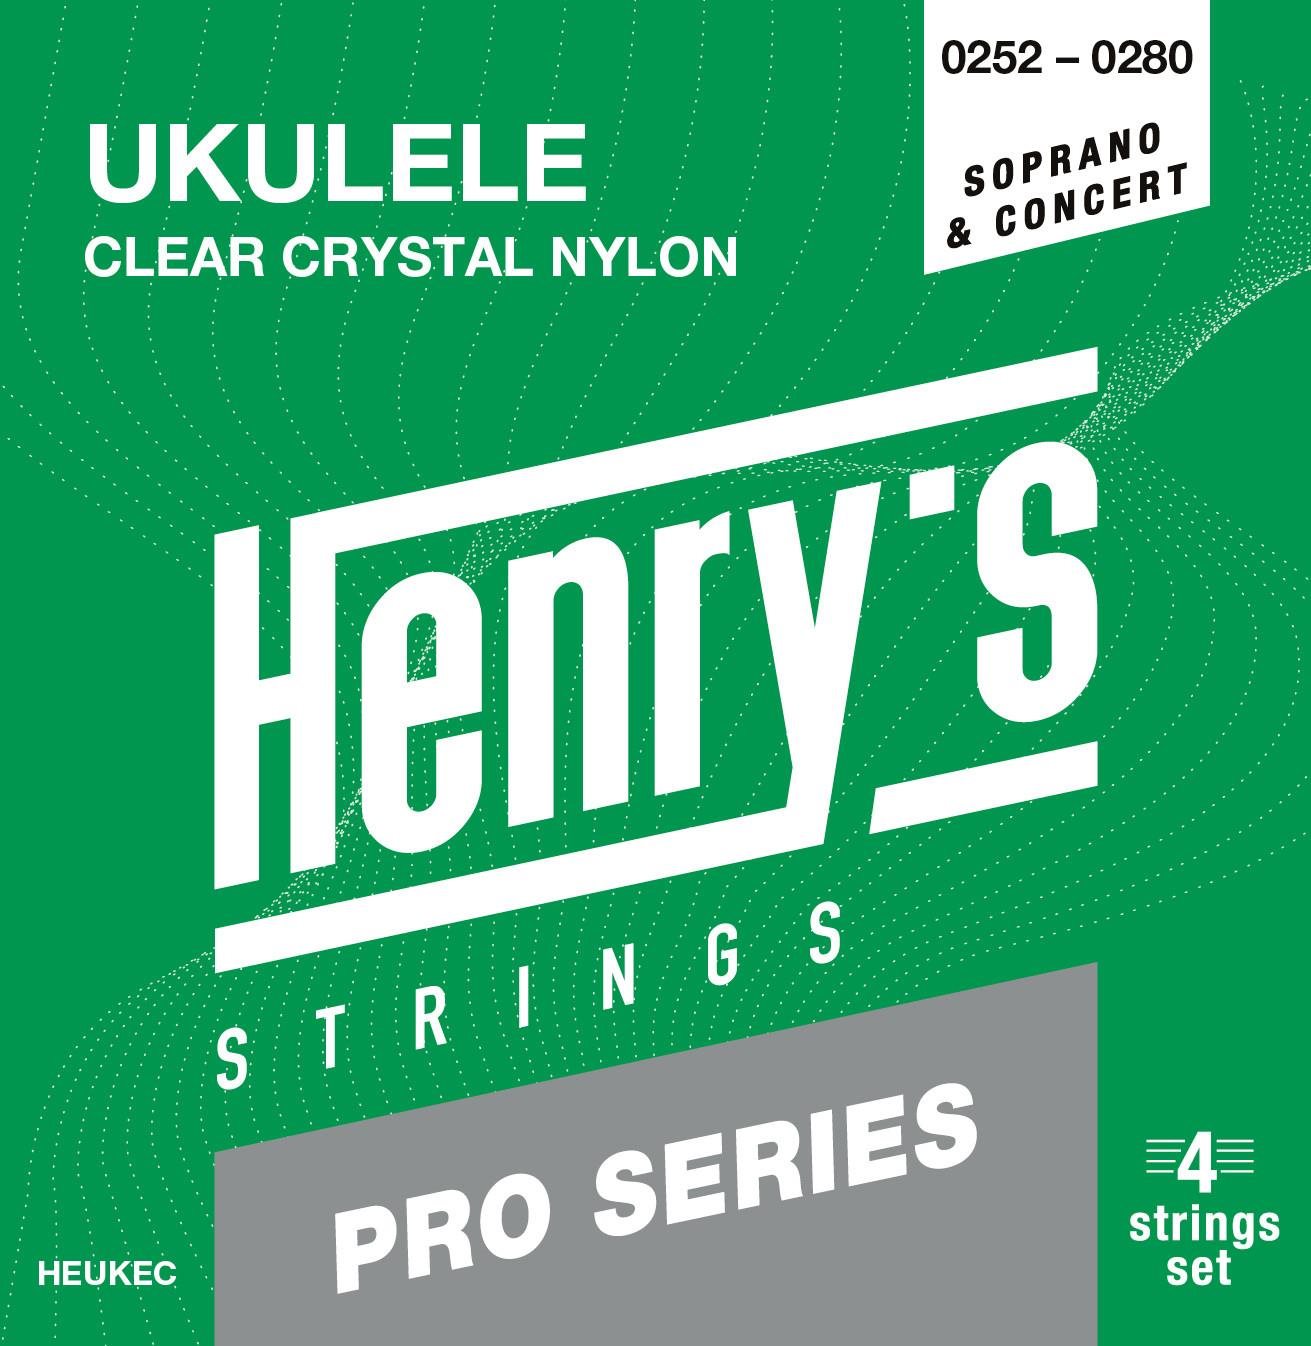 Henry's Strings Clear Crystal Nylon